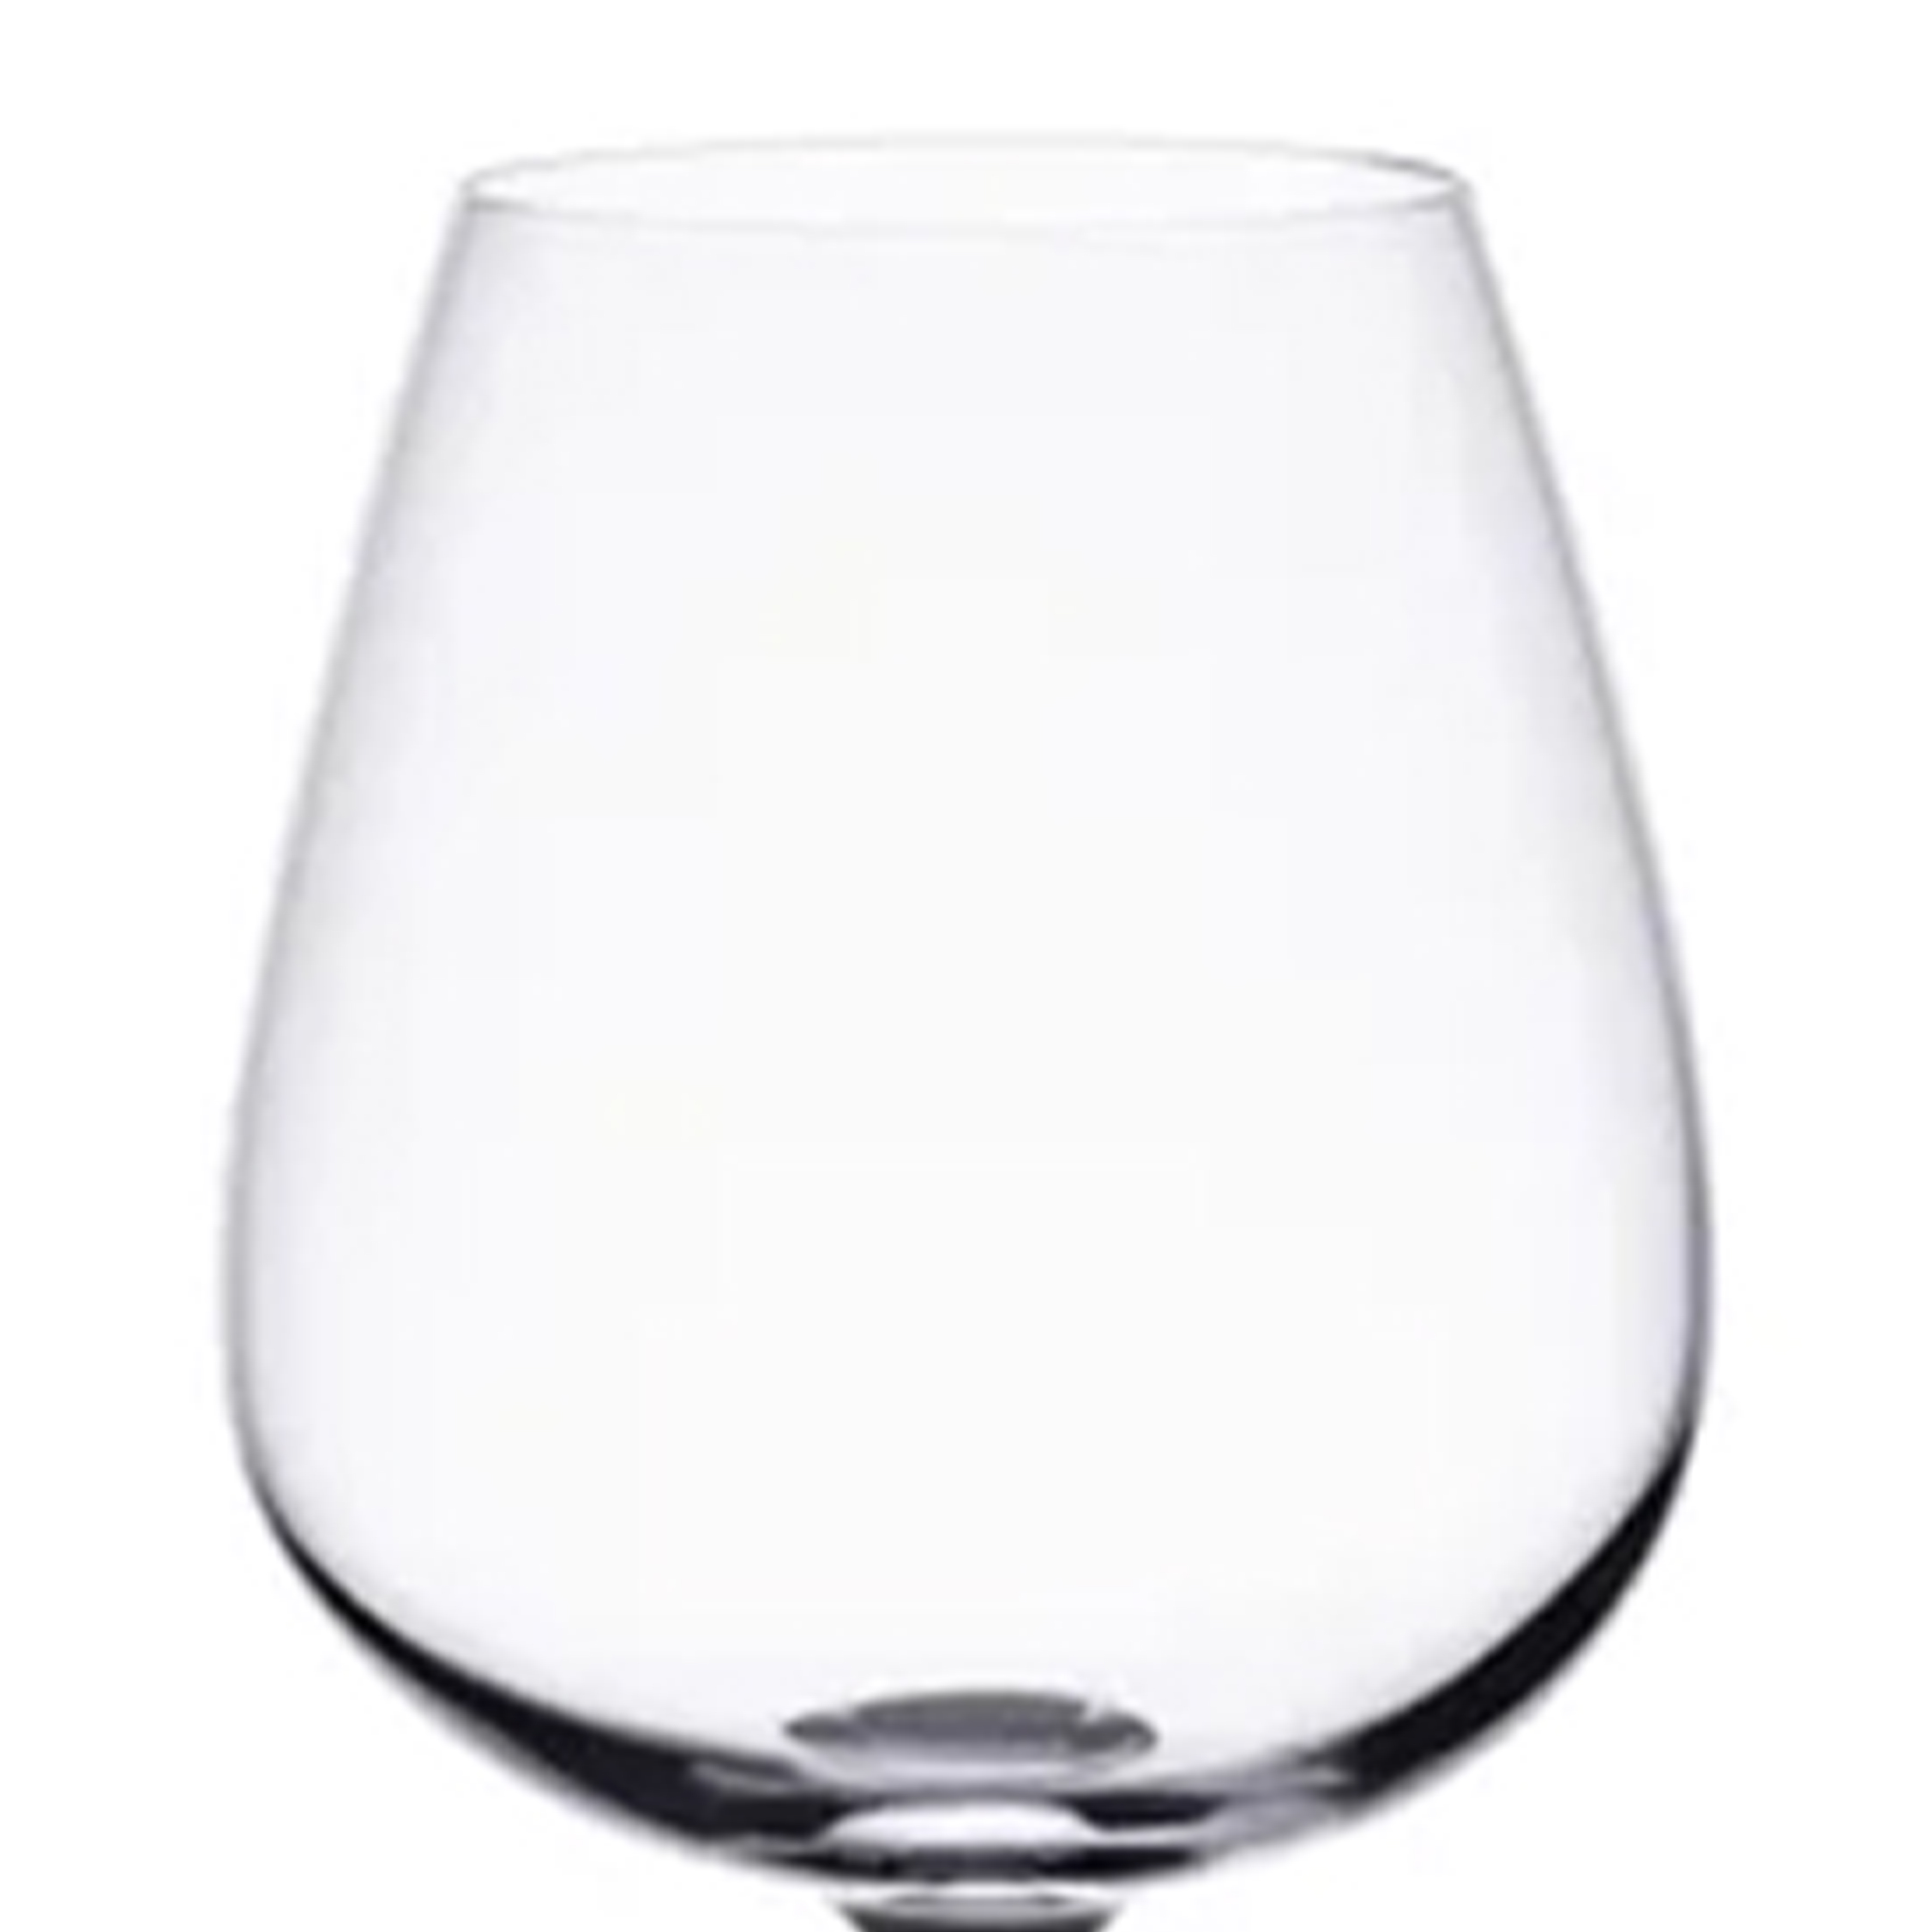 Personalised Engraved Grands Cepages 12.5oz Red Wine Glass With Gift Box Any Message Engraved!! 